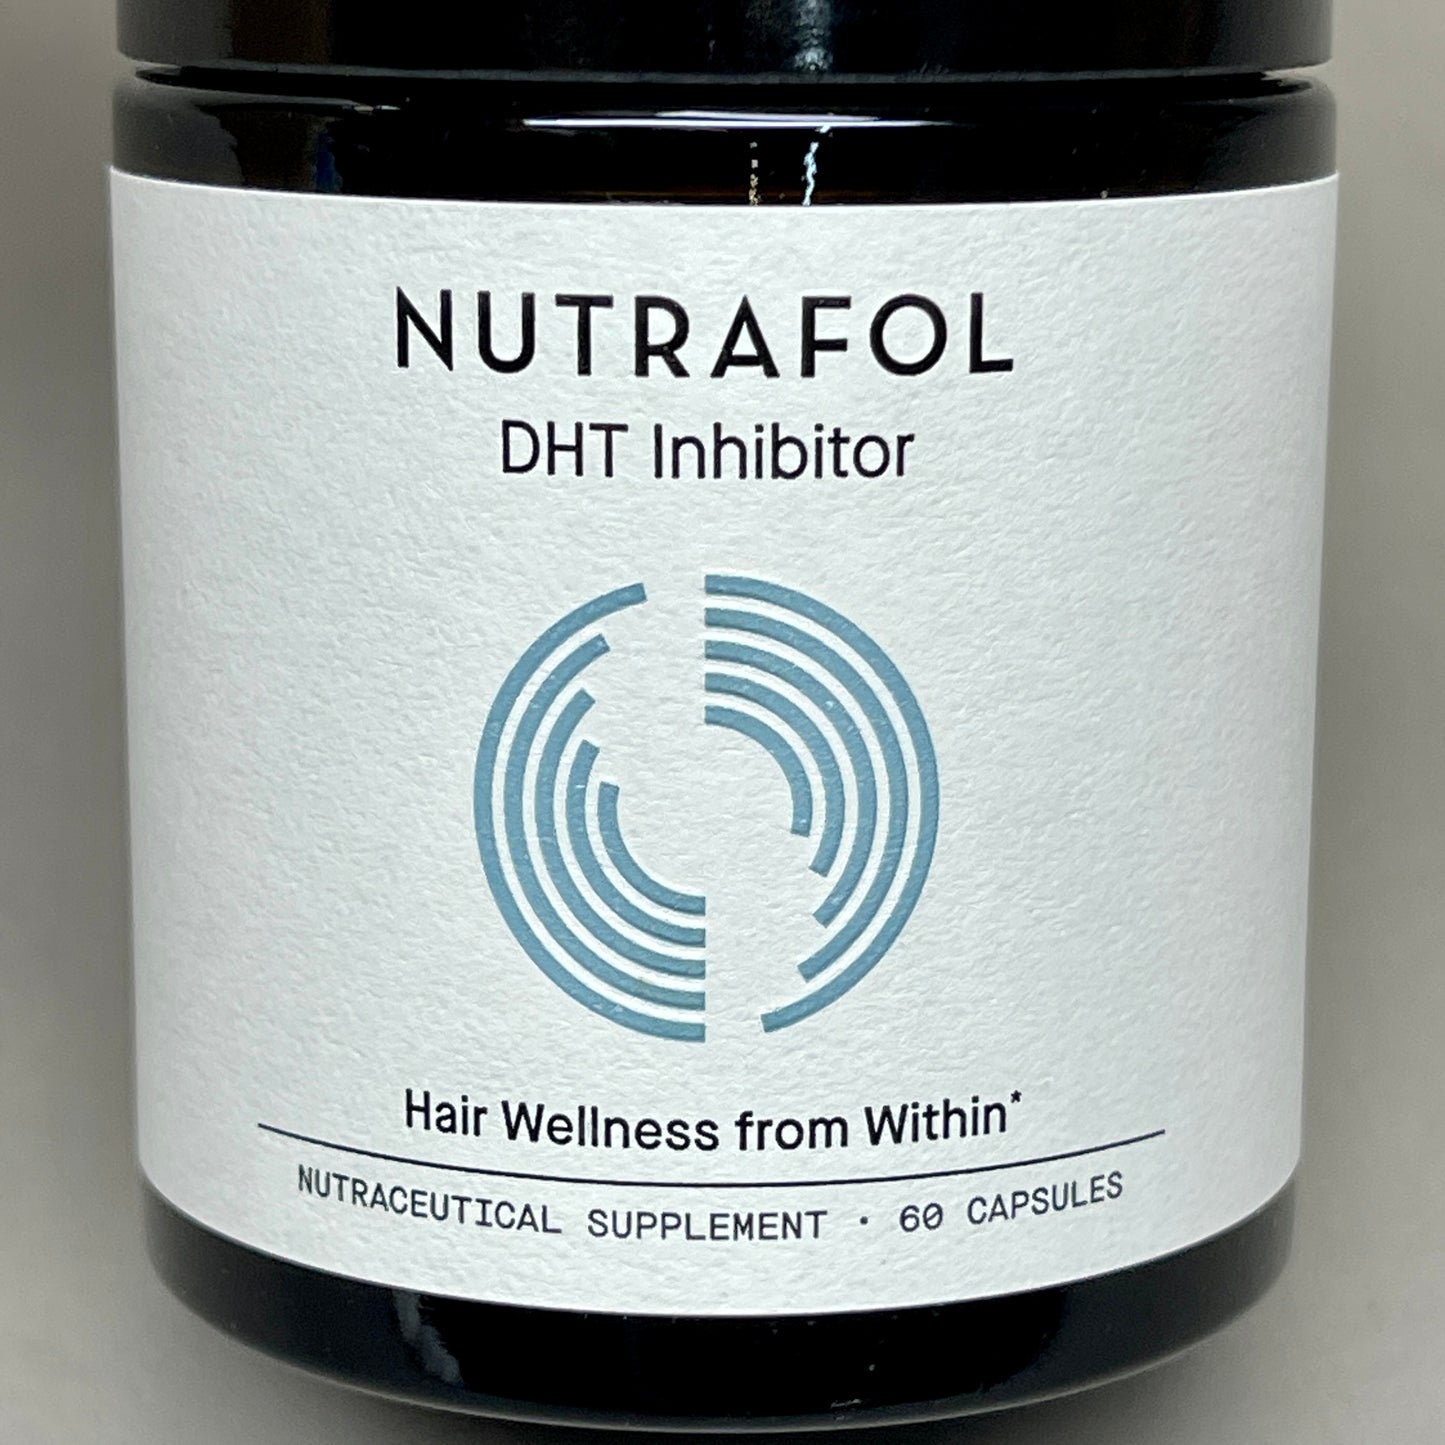 Z@ NUTRAFOL DHT Inhibitor Hair Wellness From Within 60 Capusles EXP 04/24 (New)